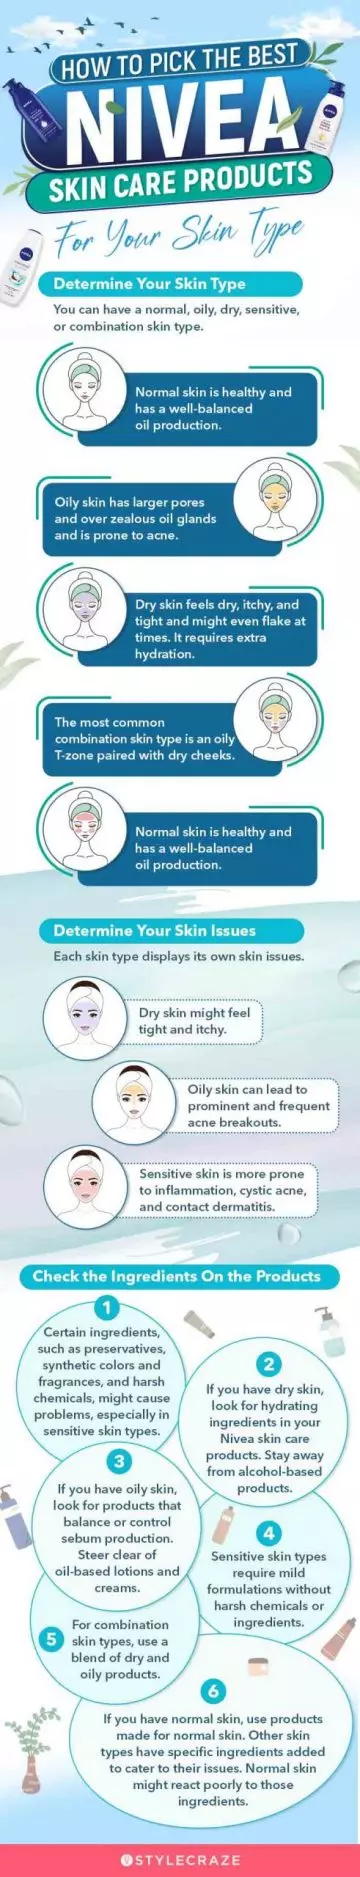 How-To-Pick-The-Best-Nivea-Skin-Care-Products-For-Your-Skin-Type